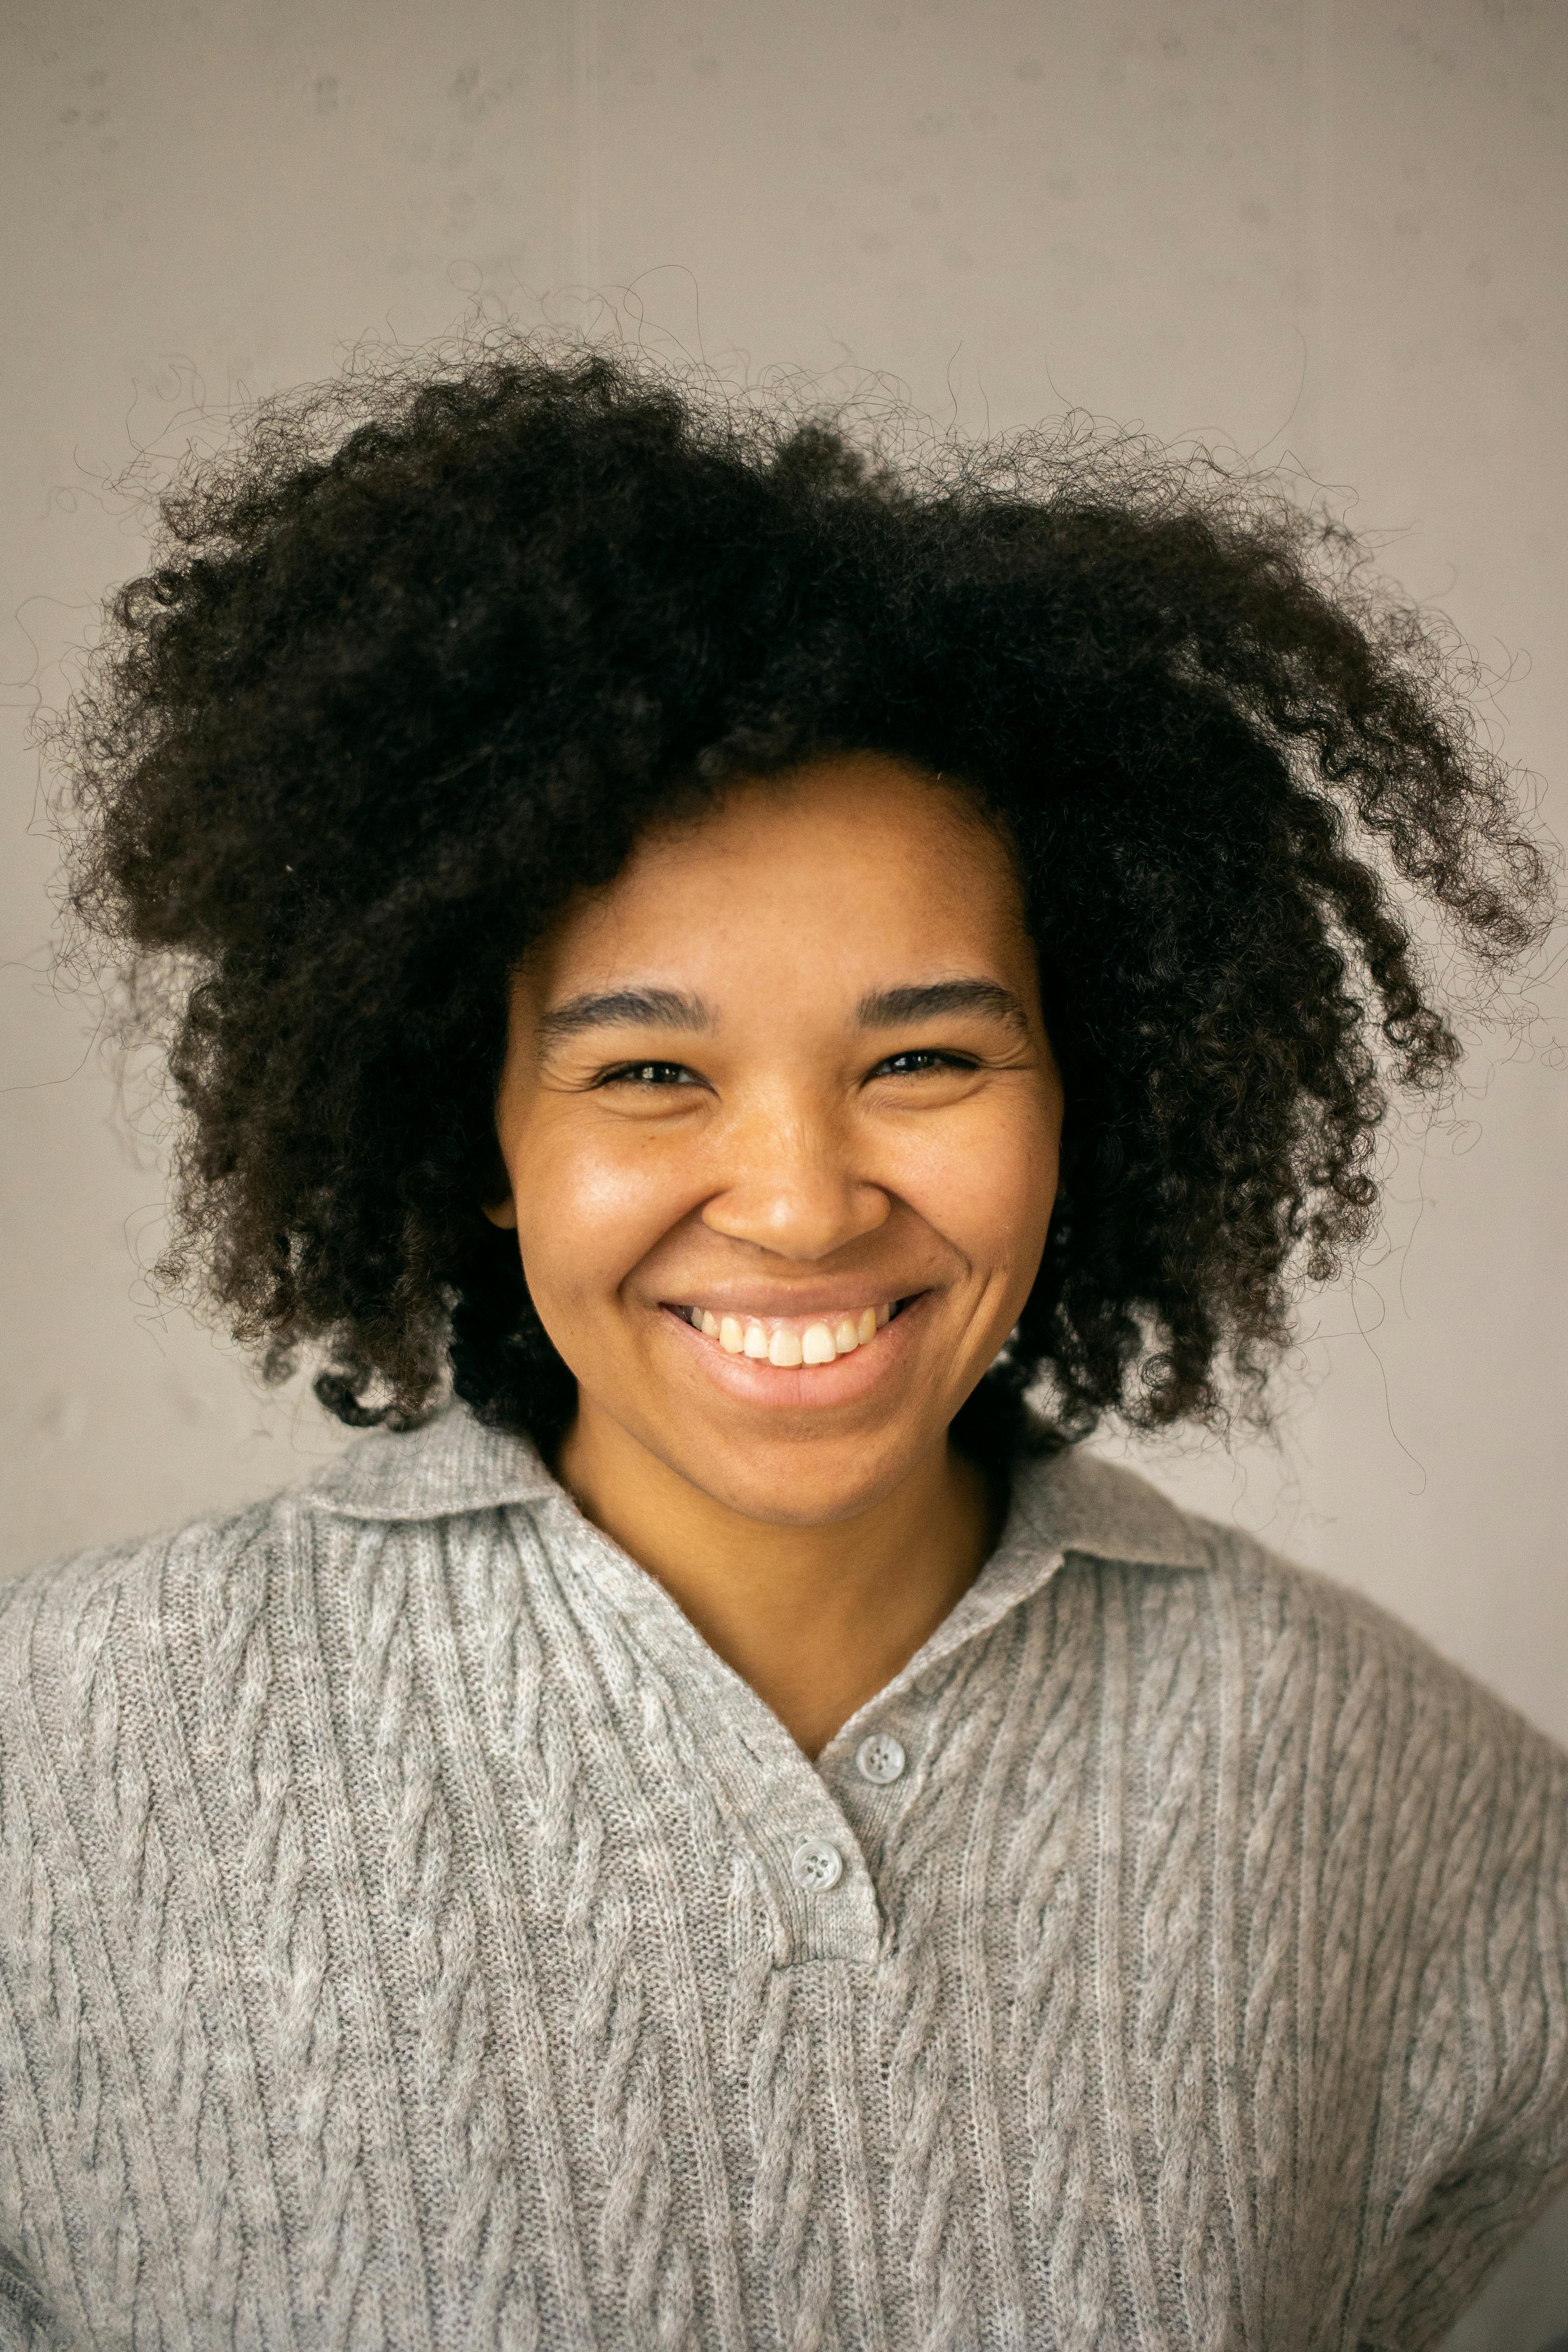 Smiling black female with dark curly hair · Free Stock Photo